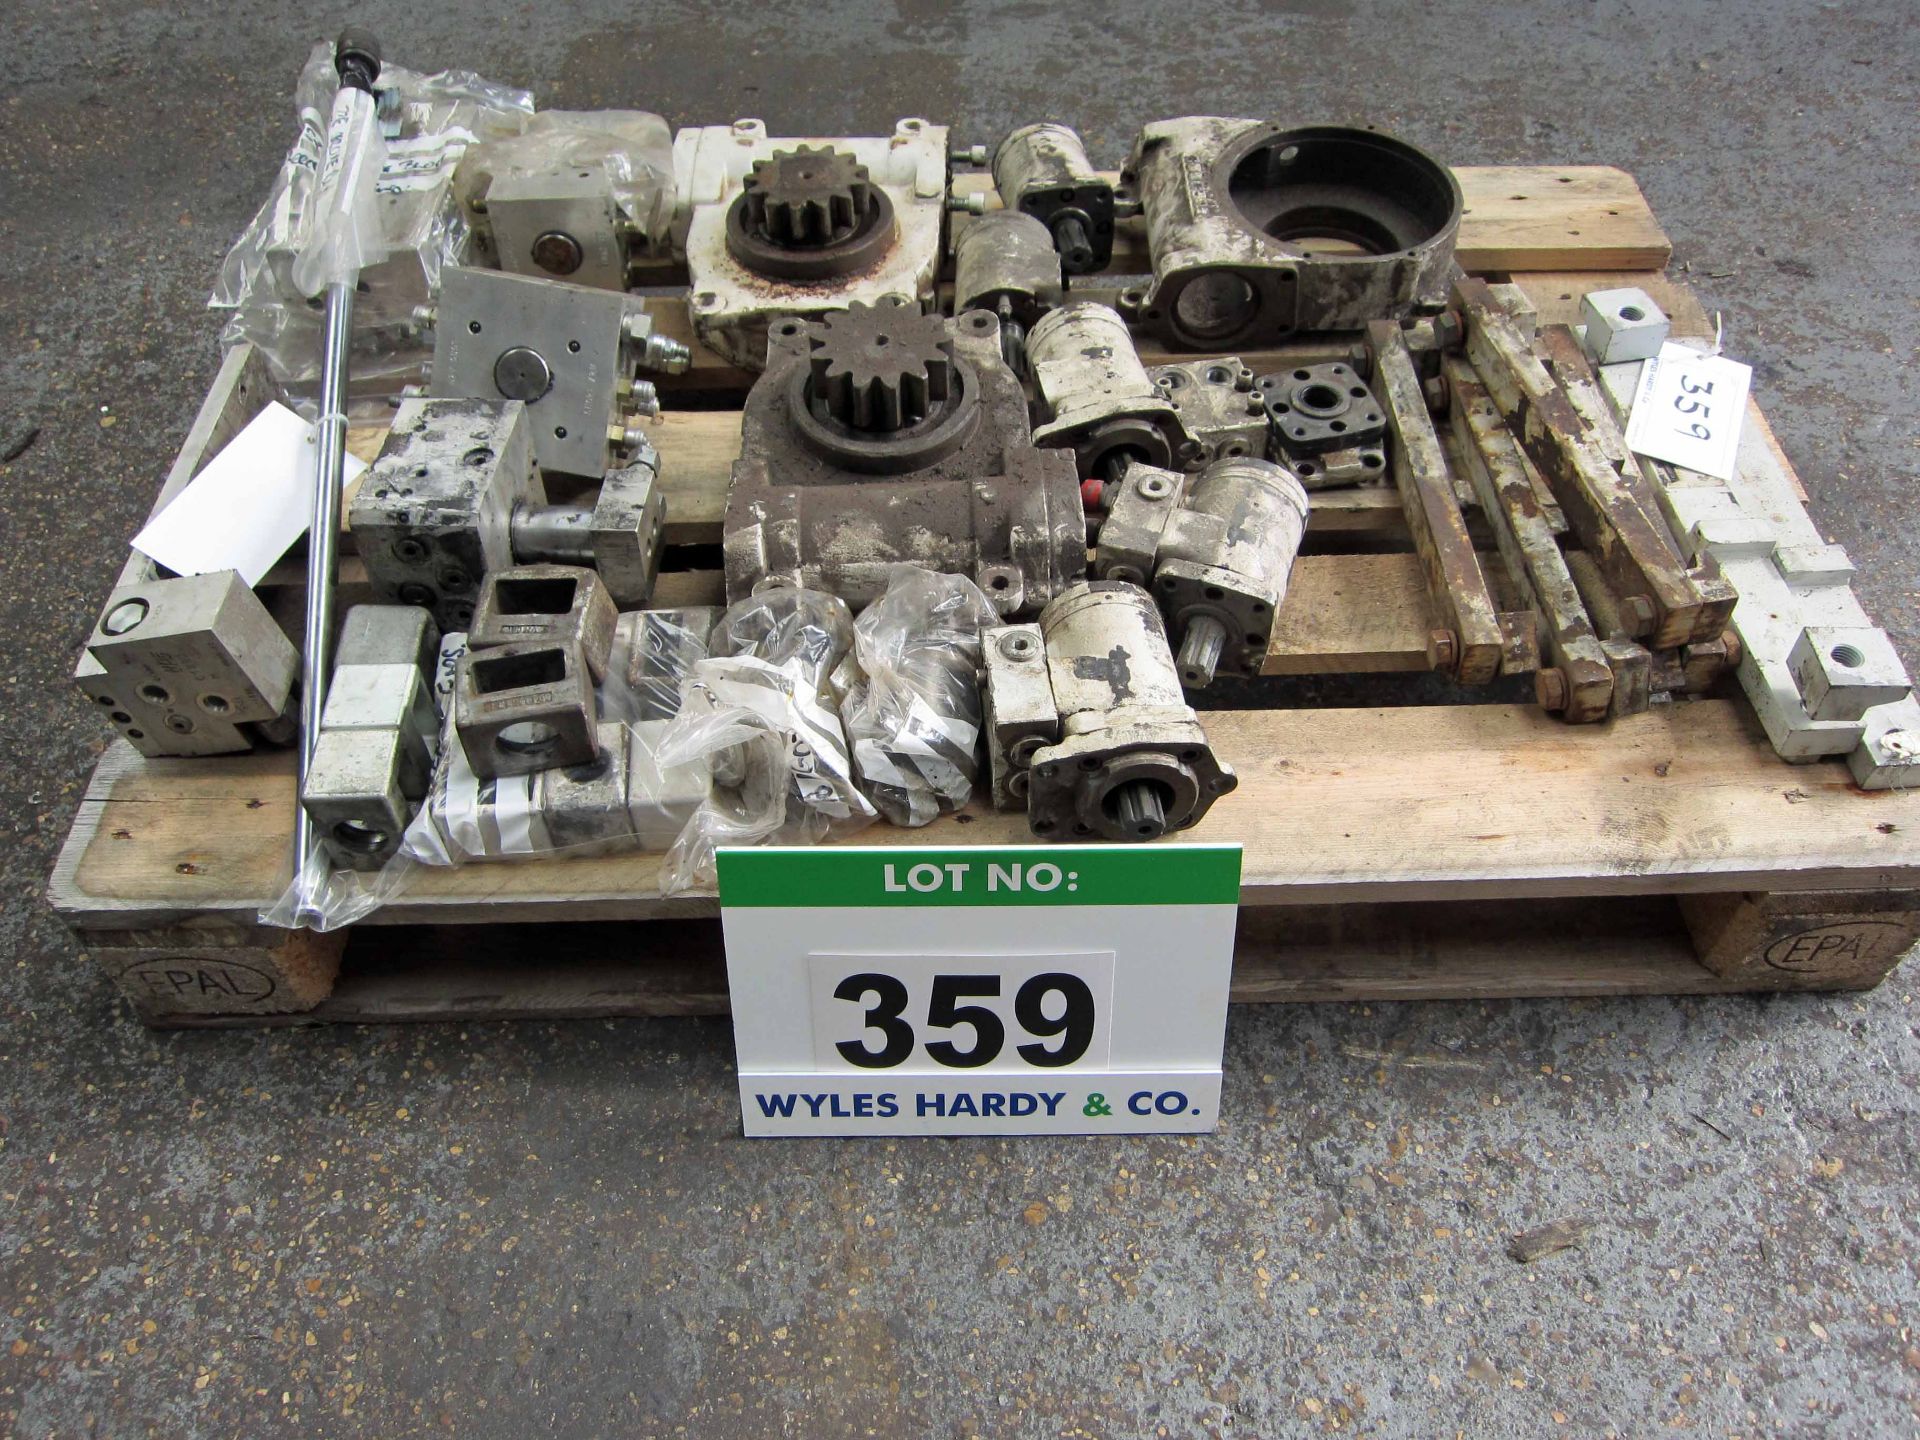 A Pallet of CASCADE Gearboxes and Gearbox Components, Hydraulic Motors, Hydraulic Rotary Groups,